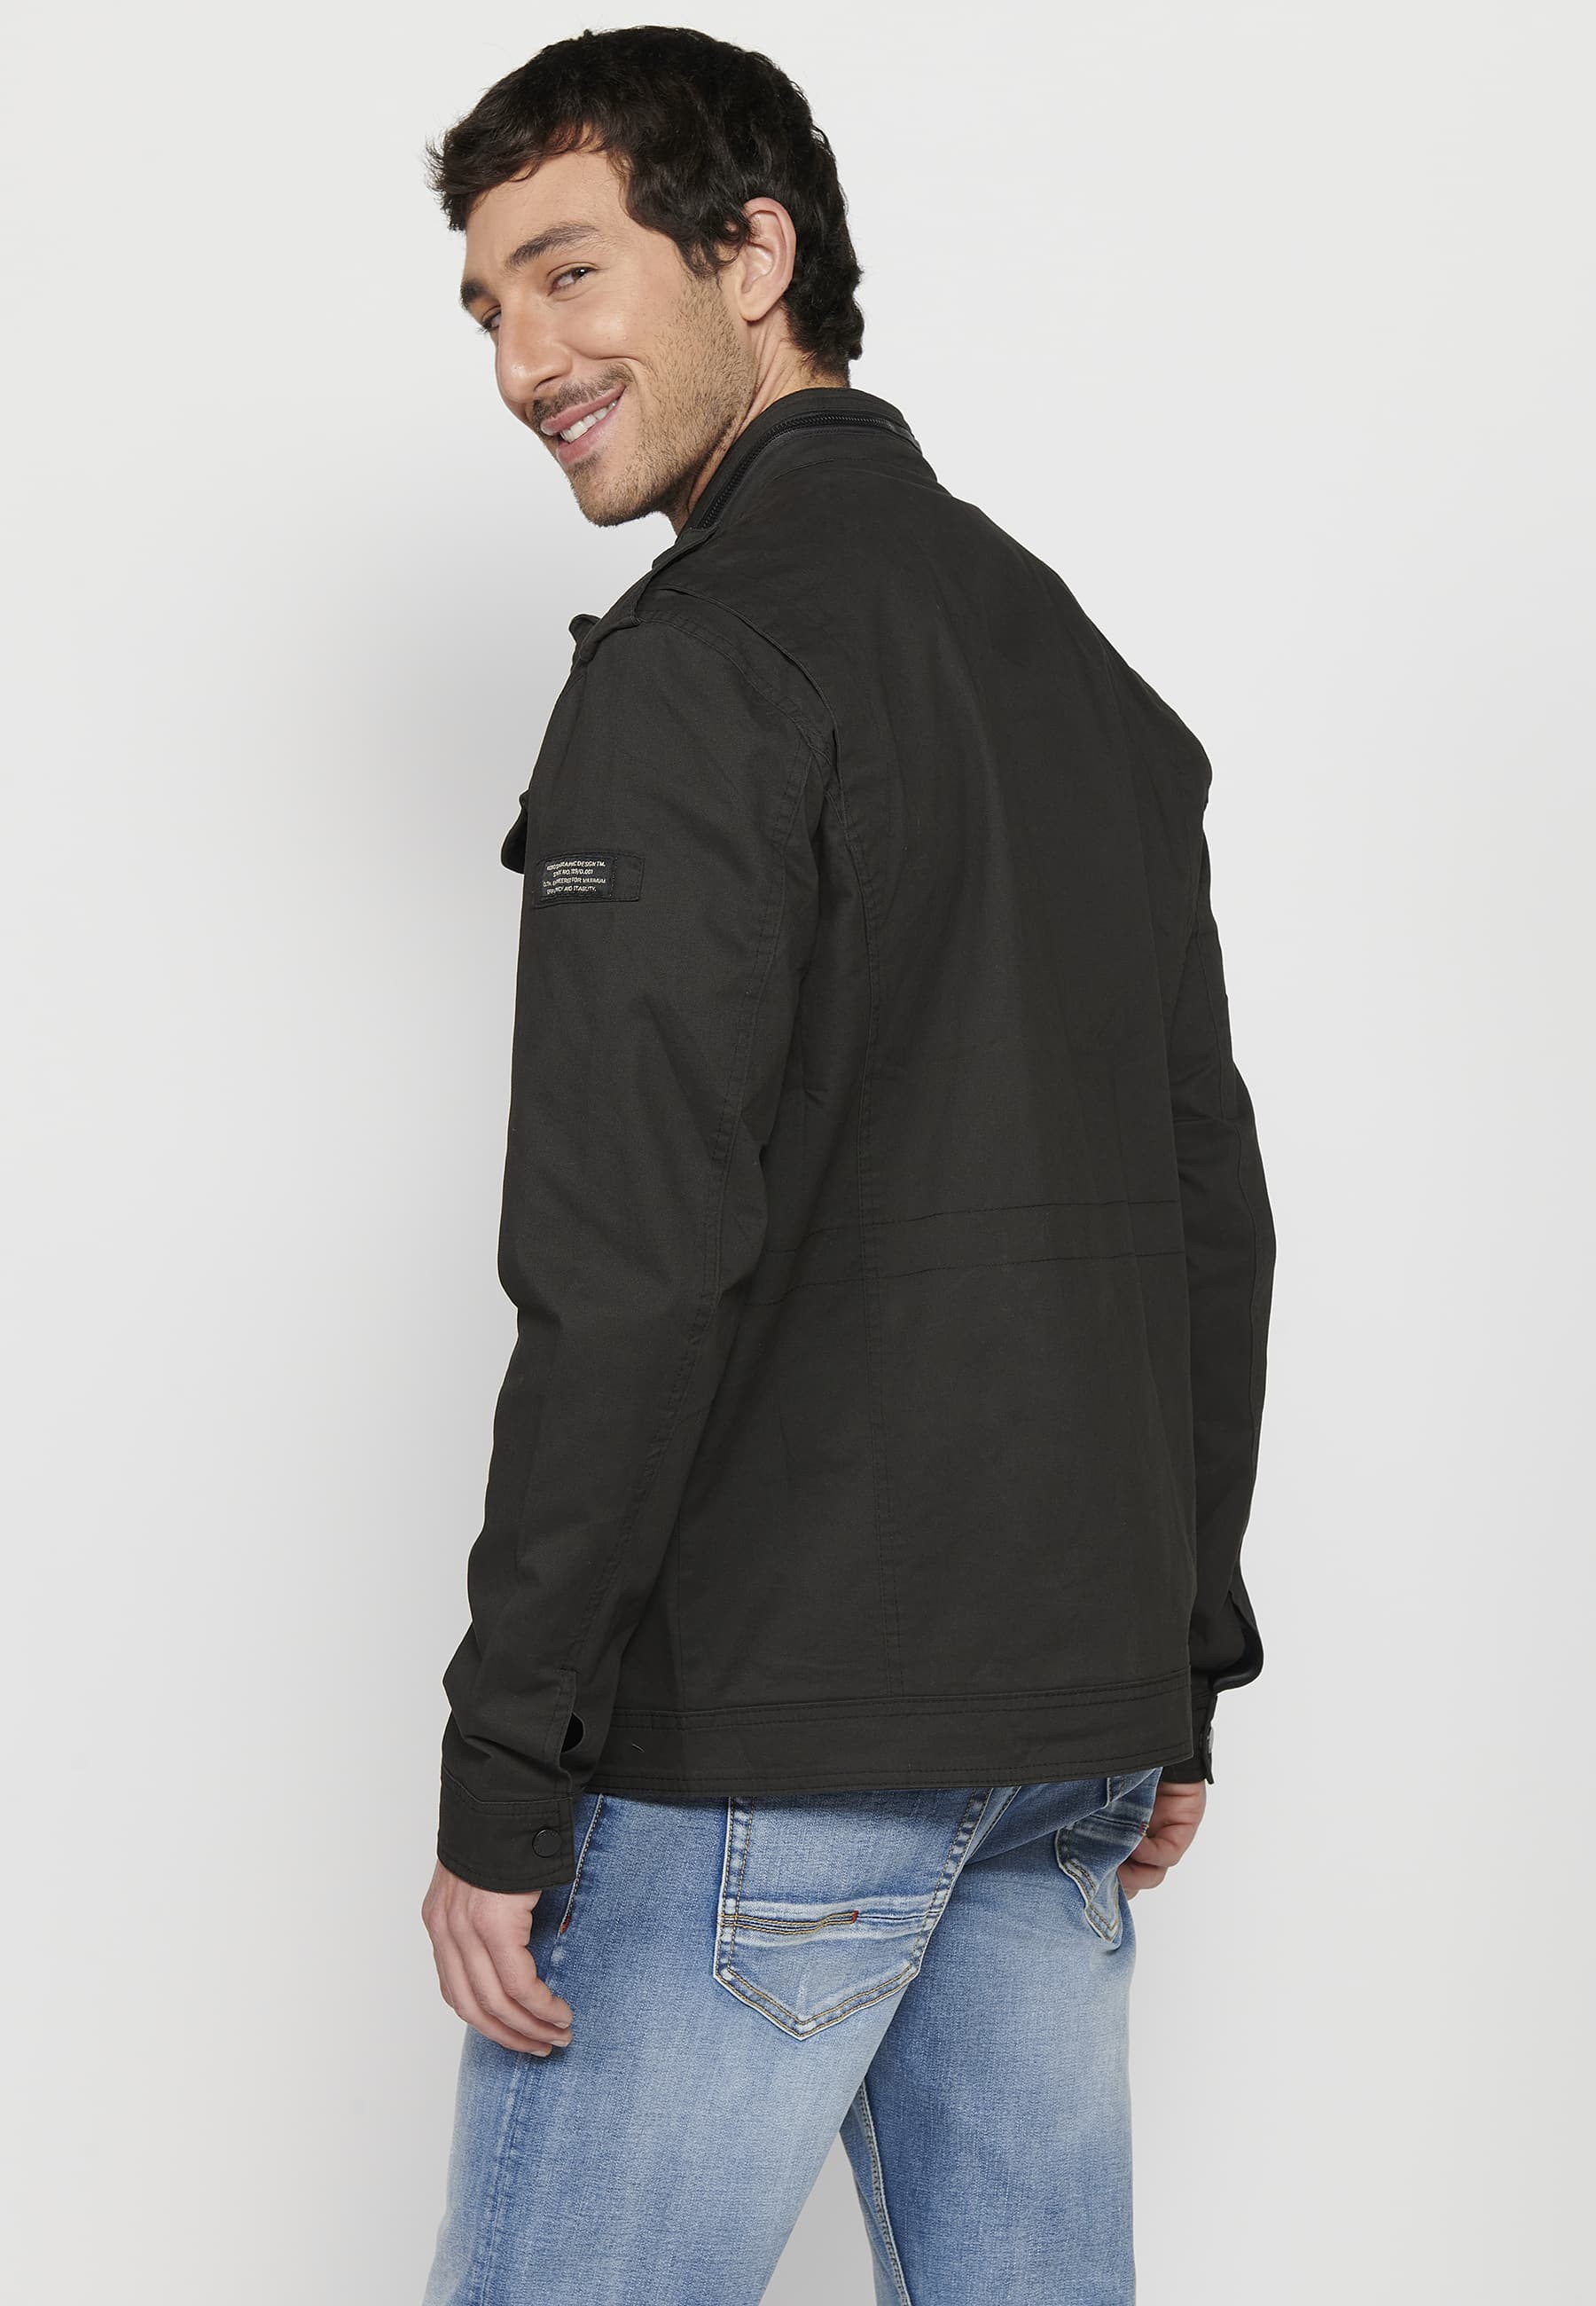 Long-sleeved jacket with high collar and front zipper closure with pockets in black for men. 8